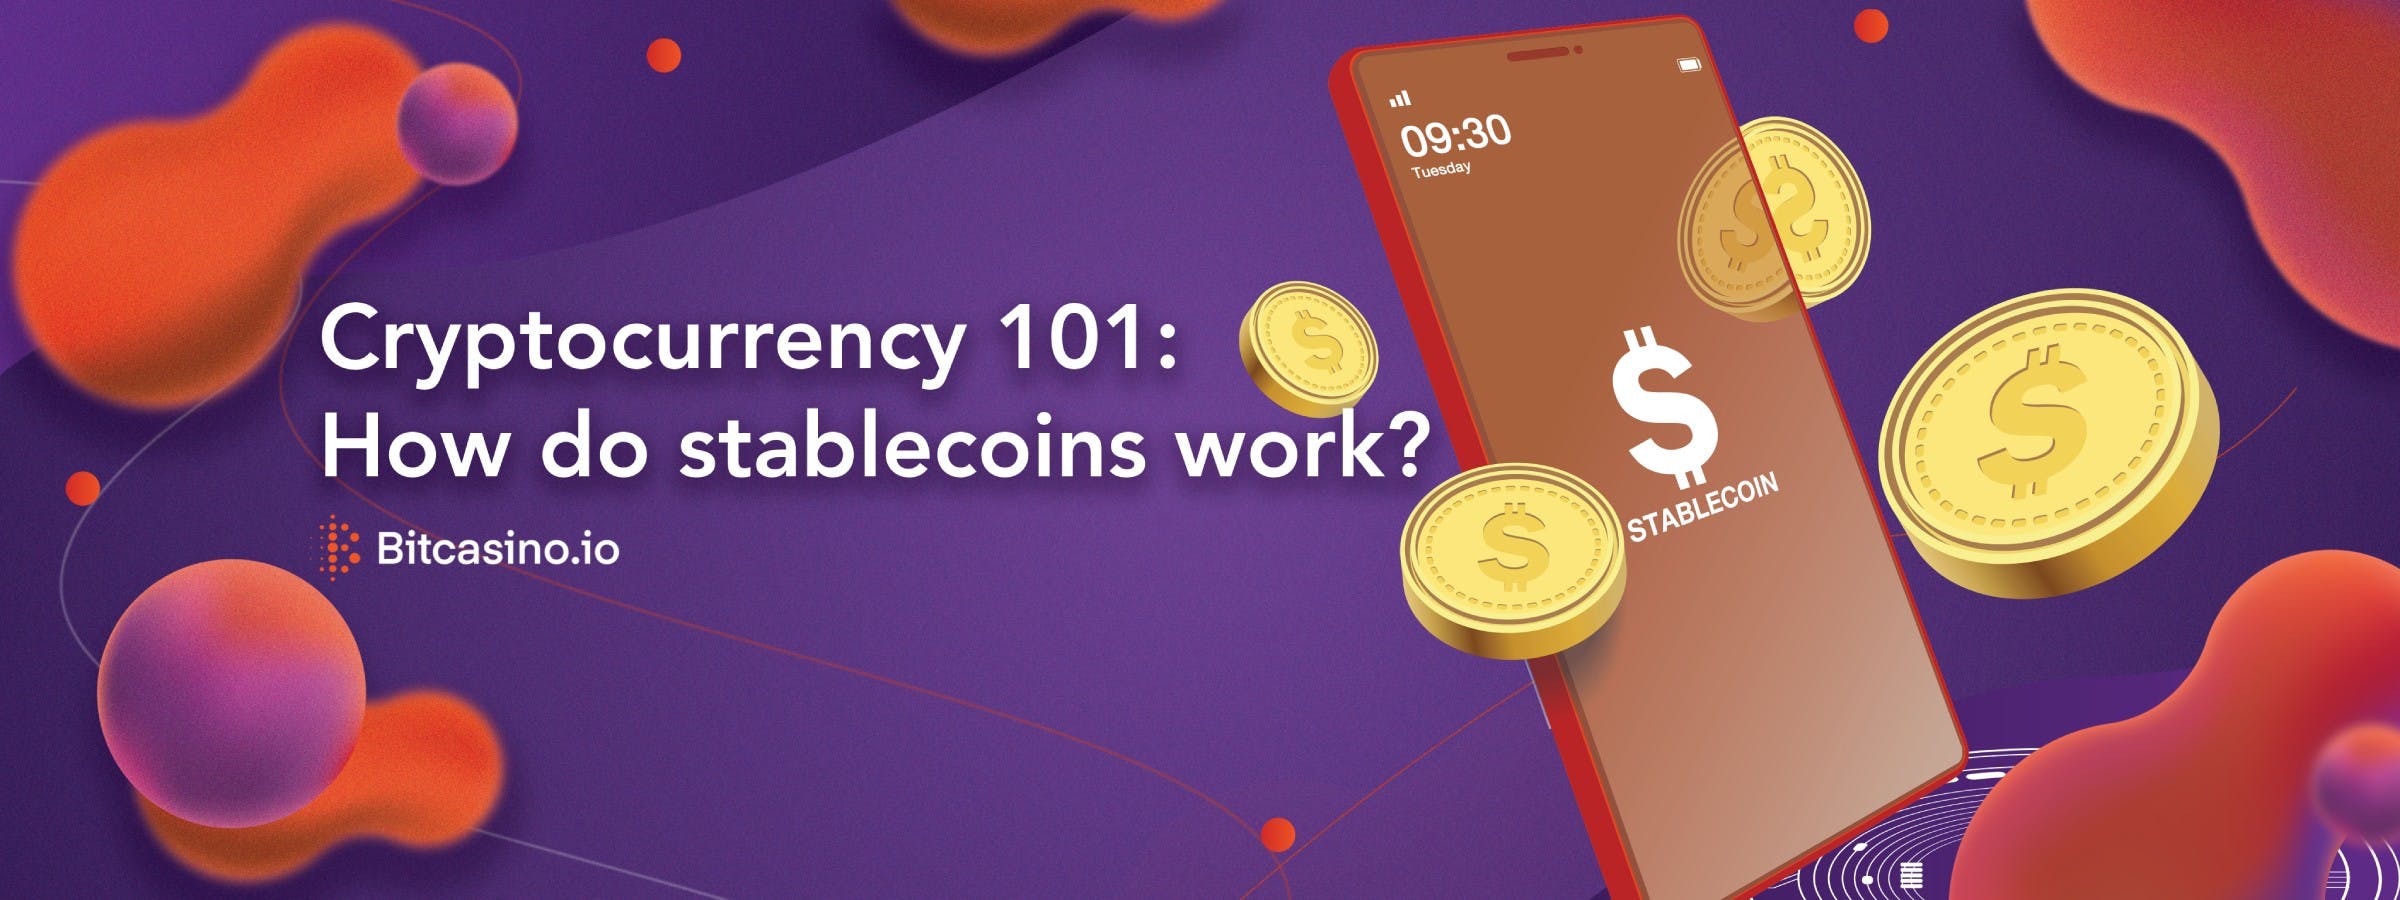 What is Stablecoin?